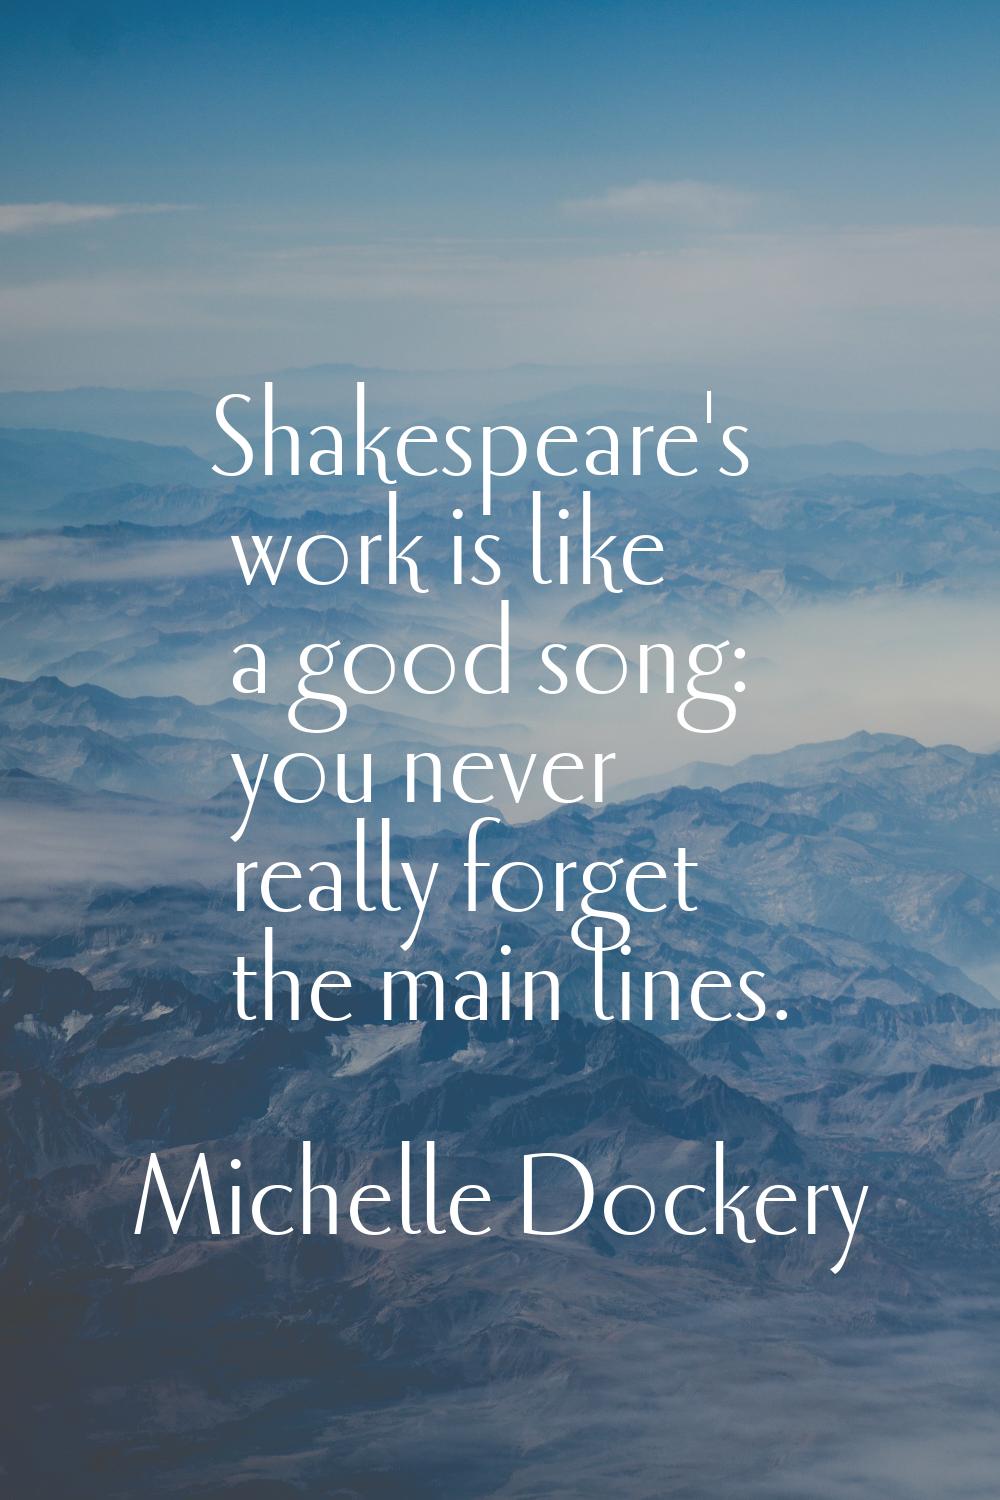 Shakespeare's work is like a good song: you never really forget the main lines.